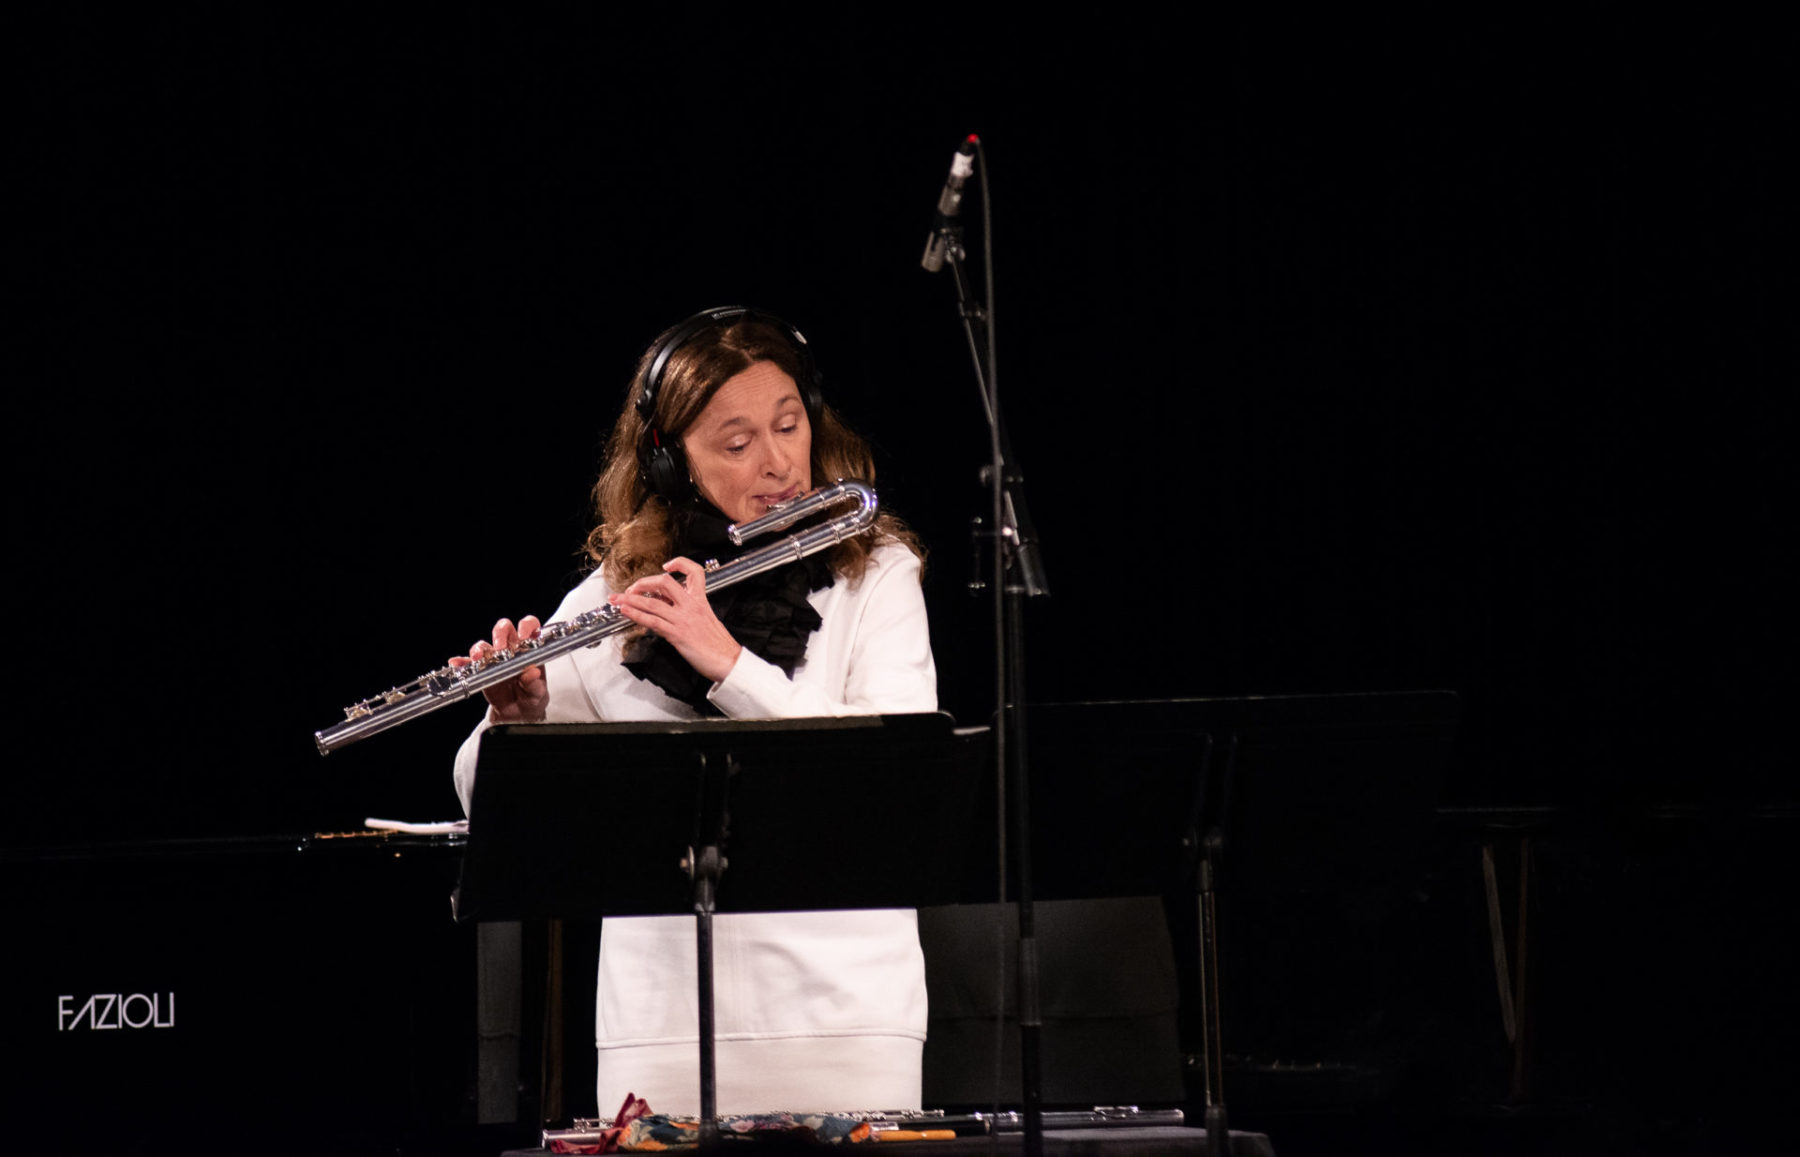 Claire Marchand, blazed more brightly, Modulus Festival 2018